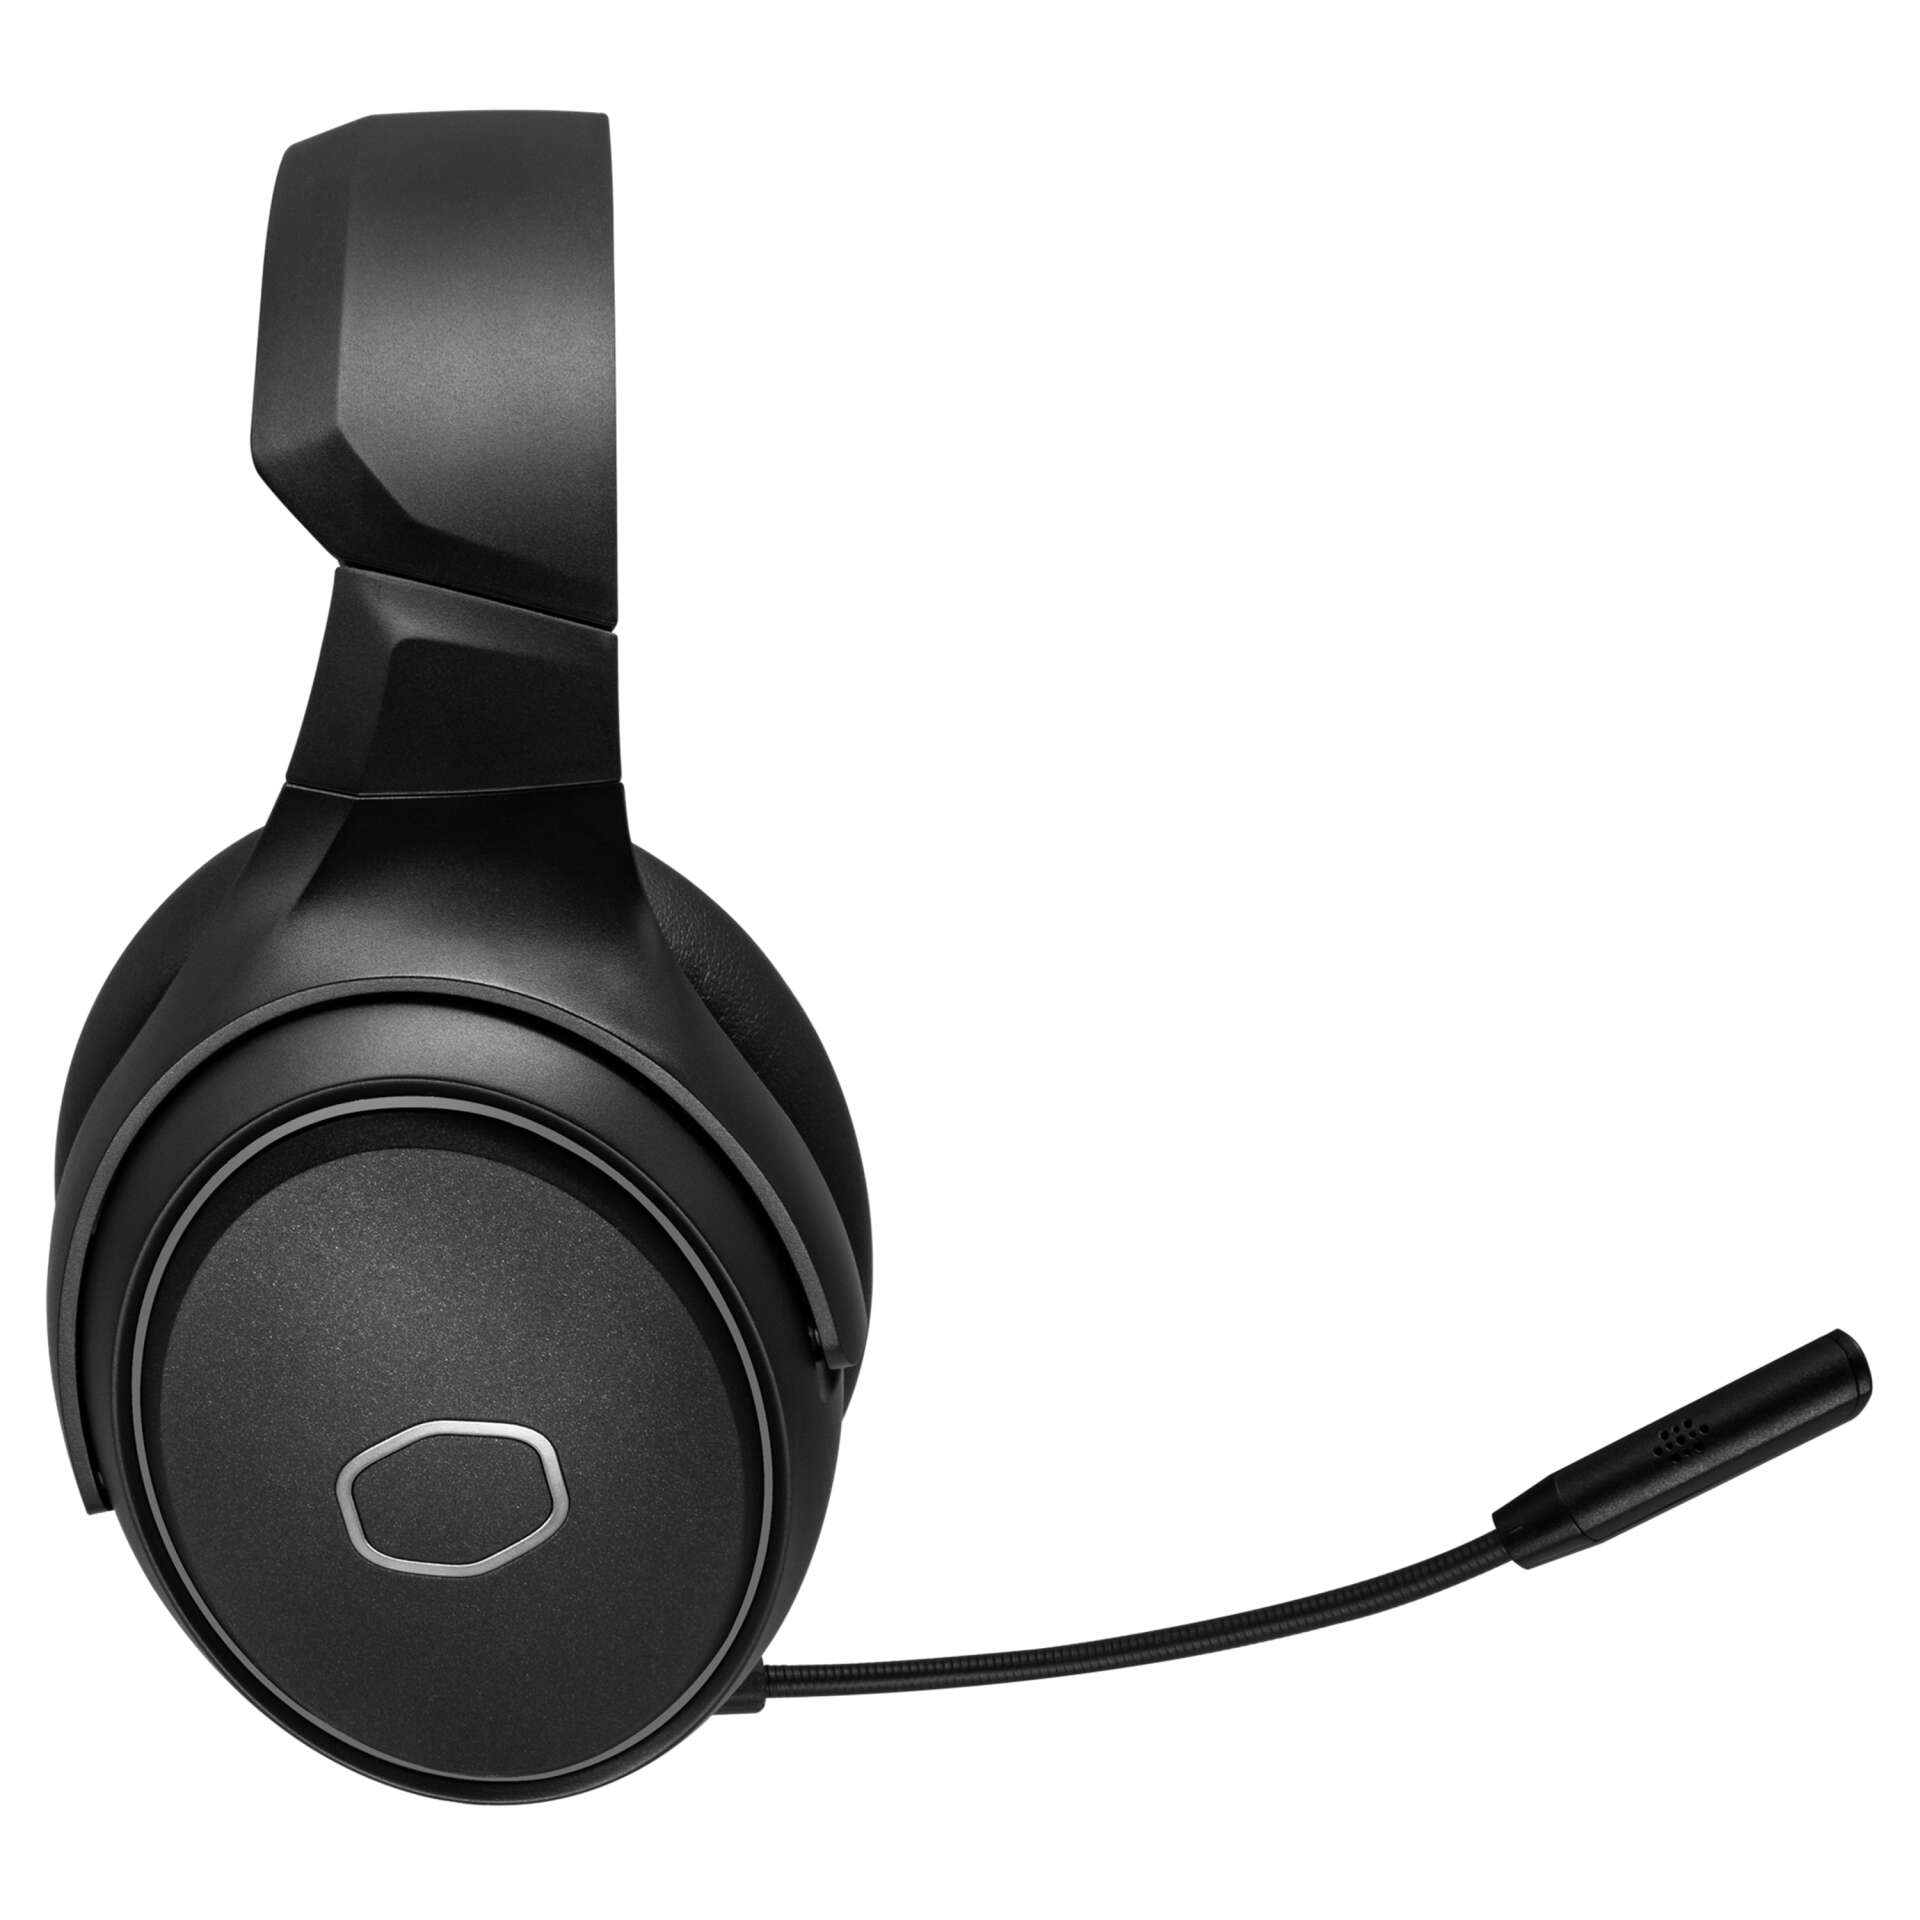 Cooler master mh-670 wireless headset black mh-670